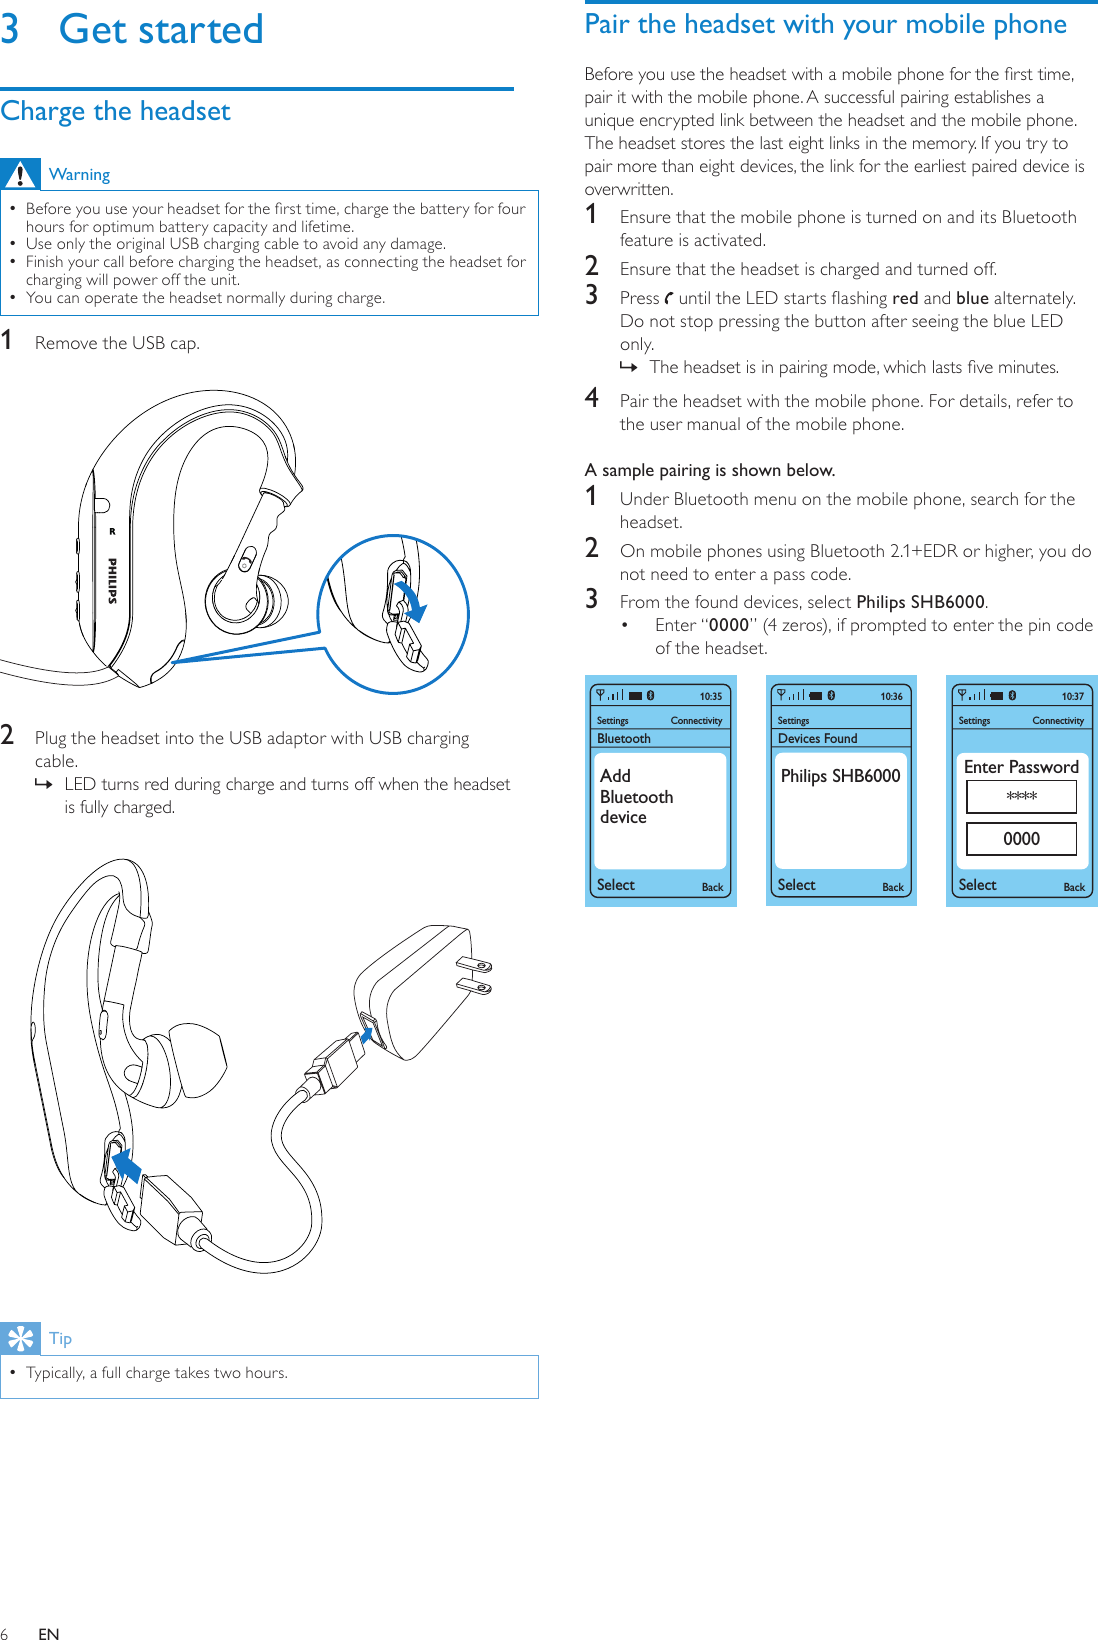 6Pair the headset with your mobile phoneBefore you use the headset with a mobile phone for the rst time, pair it with the mobile phone. A successful pairing establishes a unique encrypted link between the headset and the mobile phone. The headset stores the last eight links in the memory. If you try to pair more than eight devices, the link for the earliest paired device is overwritten.1  Ensure that the mobile phone is turned on and its Bluetooth feature is activated.2  Ensure that the headset is charged and turned off.3  Press   until the LED starts ashing red and blue alternately. Do not stop pressing the button after seeing the blue LED only.The headset is in pairing mode, which lasts ve minutes. »4  Pair the headset with the mobile phone. For details, refer to the user manual of the mobile phone.A sample pairing is shown below.1  Under Bluetooth menu on the mobile phone, search for the headset.2  On mobile phones using Bluetooth 2.1+EDR or higher, you do not need to enter a pass code.3  From the found devices, select Philips SHB6000.Enter “•  0000” (4 zeros), if prompted to enter the pin code of the headset.  SettingsSelect BackConnectivity10:37Enter Password****0000SettingsBluetoothSelect BackConnectivity10:35AddBluetoothdeviceSettingsDevices FoundSelectBack10:36Philips SHB60003  Get startedCharge the headsetWarningBefore you use your headset for the rst time, charge the battery for four  •hours for optimum battery capacity and lifetime.Use only the original USB charging cable to avoid any damage. •Finish your call before charging the headset, as connecting the headset for  •charging will power off the unit.You can operate the headset normally during charge. •1  Remove the USB cap. 2  Plug the headset into the USB adaptor with USB charging cable.LED turns red during charge and turns off when the headset  »is fully charged. TipTypically, a full charge takes two hours. •EN